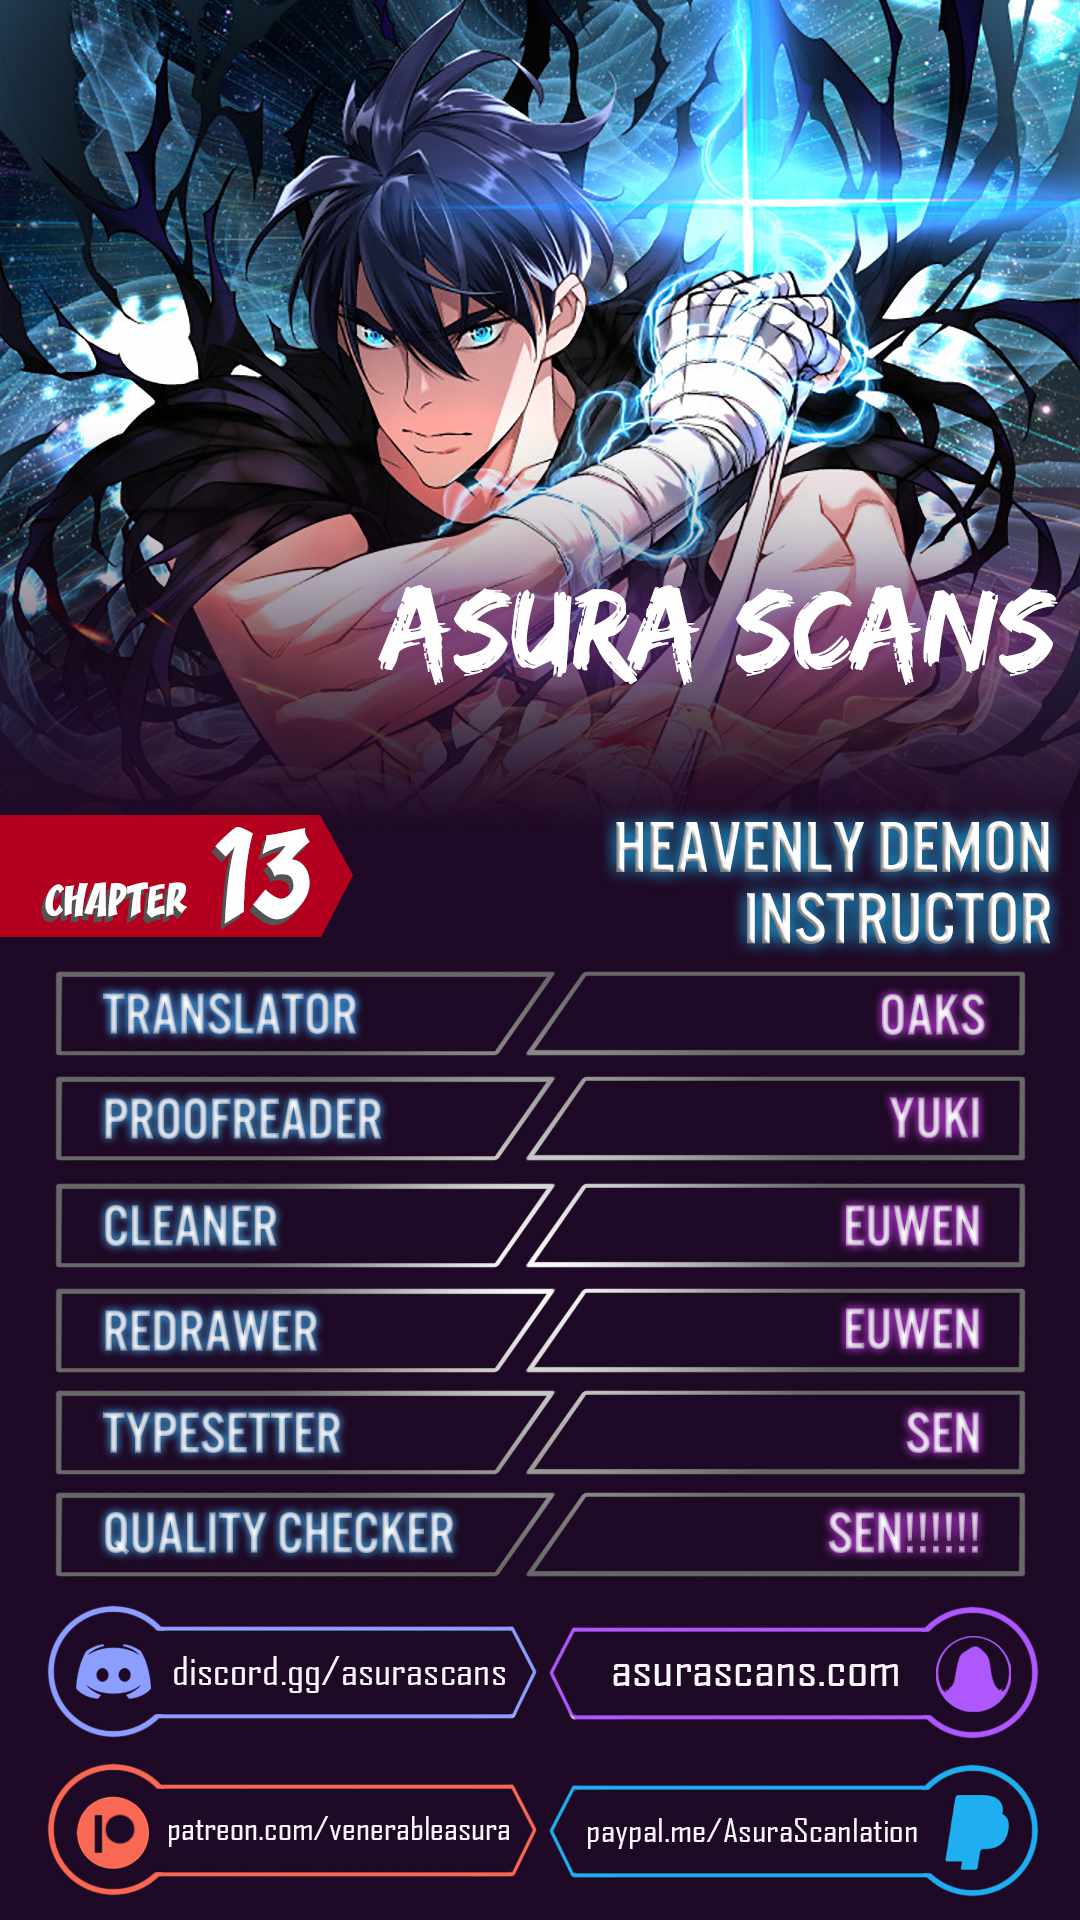 Heavenly Demon Instructor chapter 13